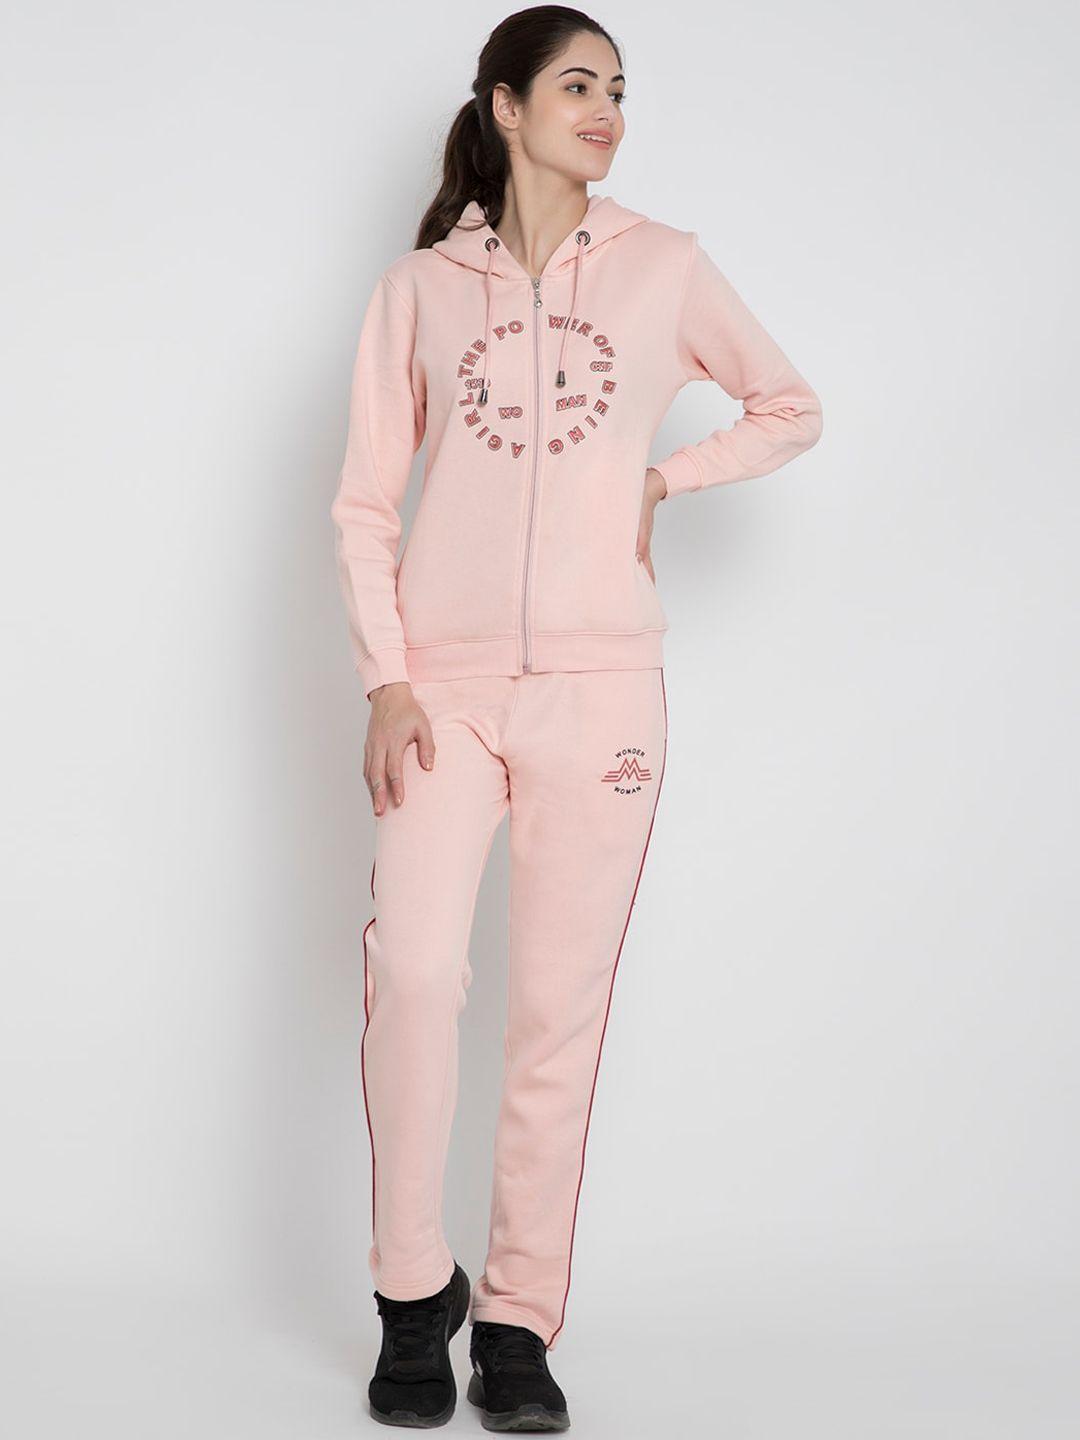 flosberry women peach printed cotton tracksuits